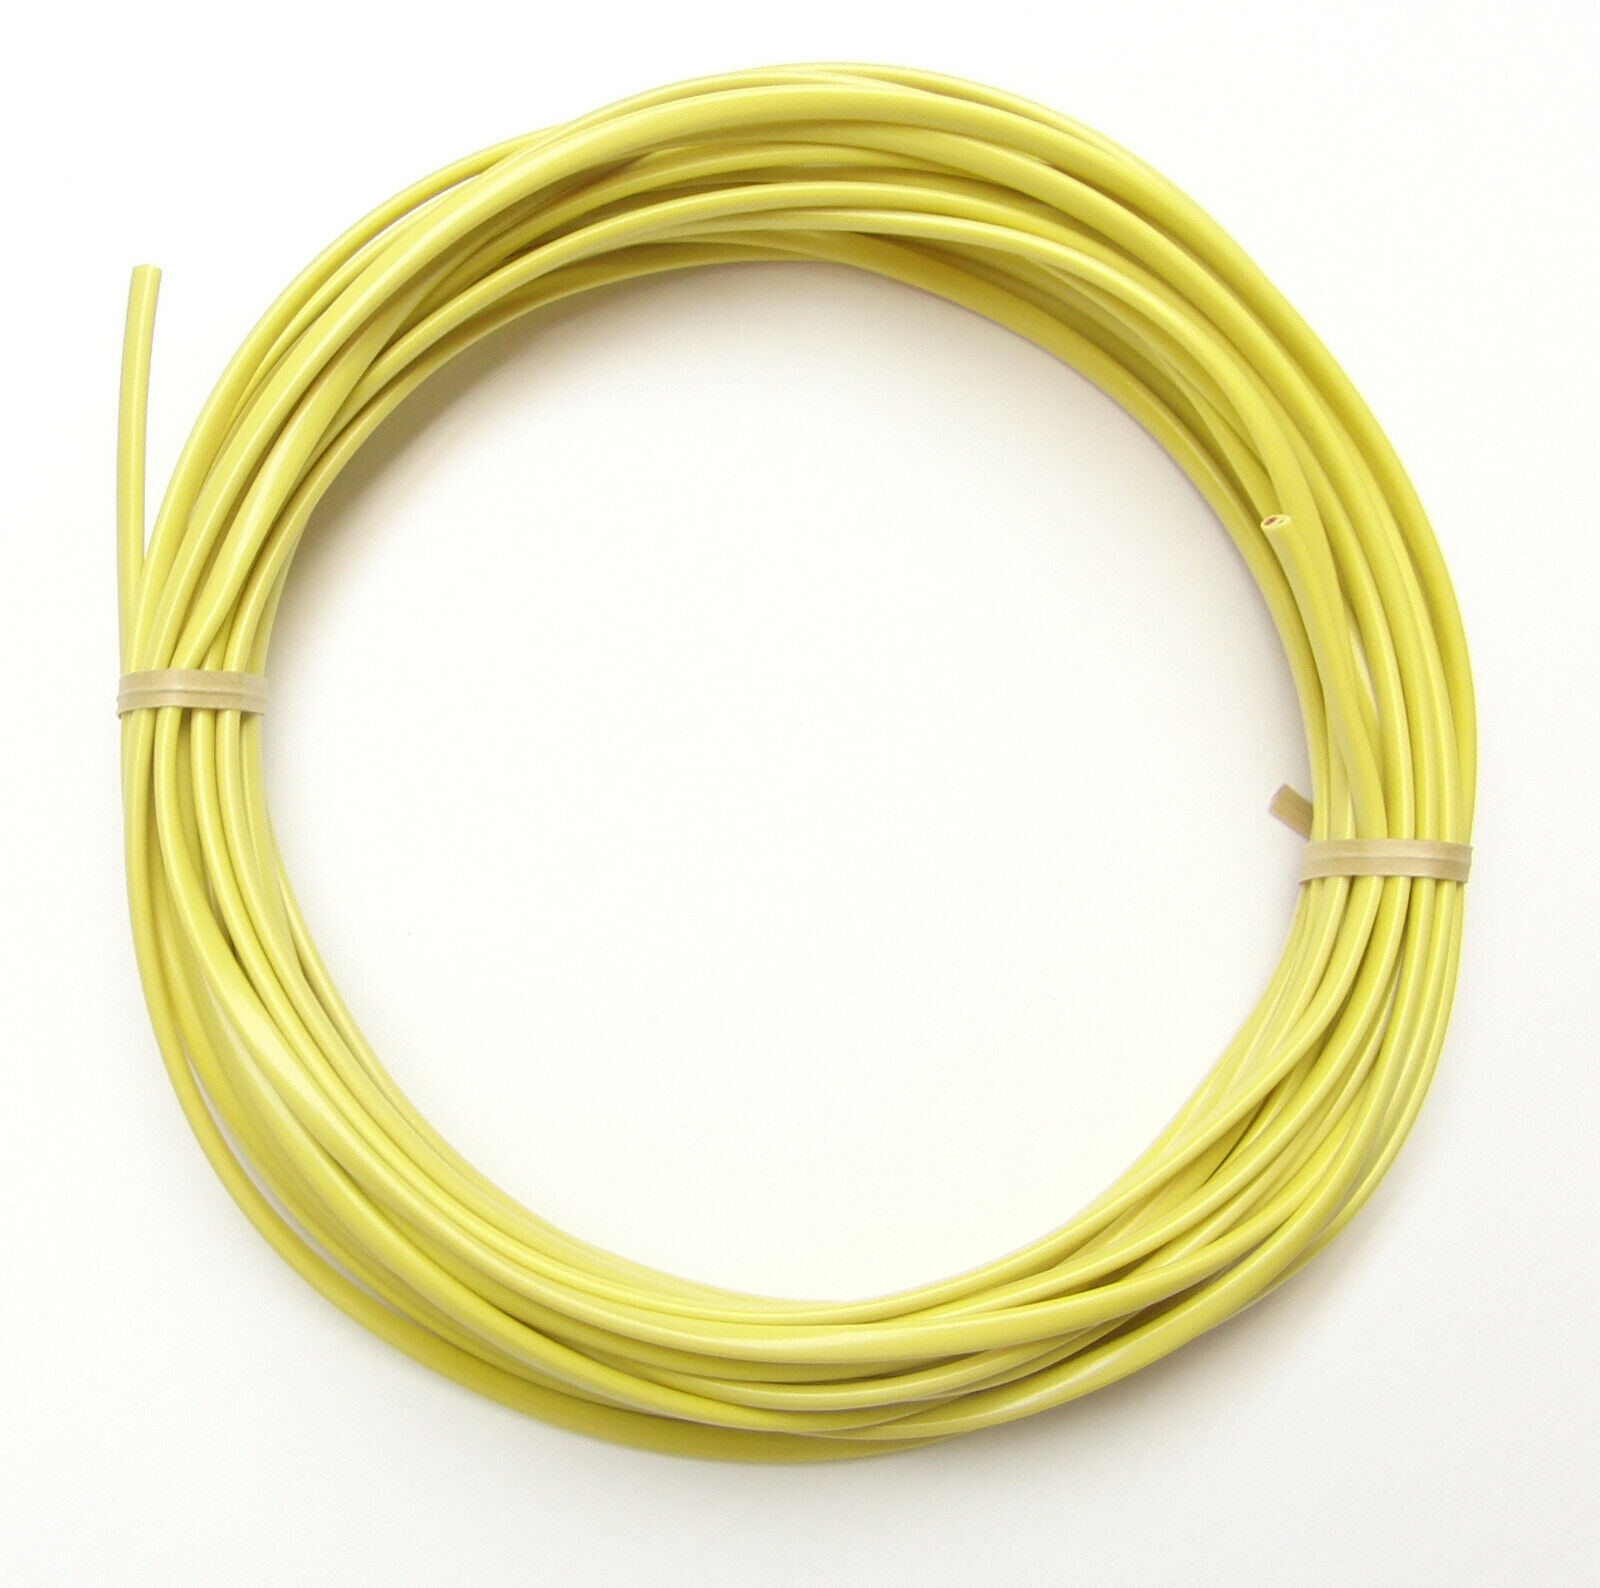 K-type Thermocouple Wire AWG 24 Stranded Wire PVC Insulation Extension 10 yard